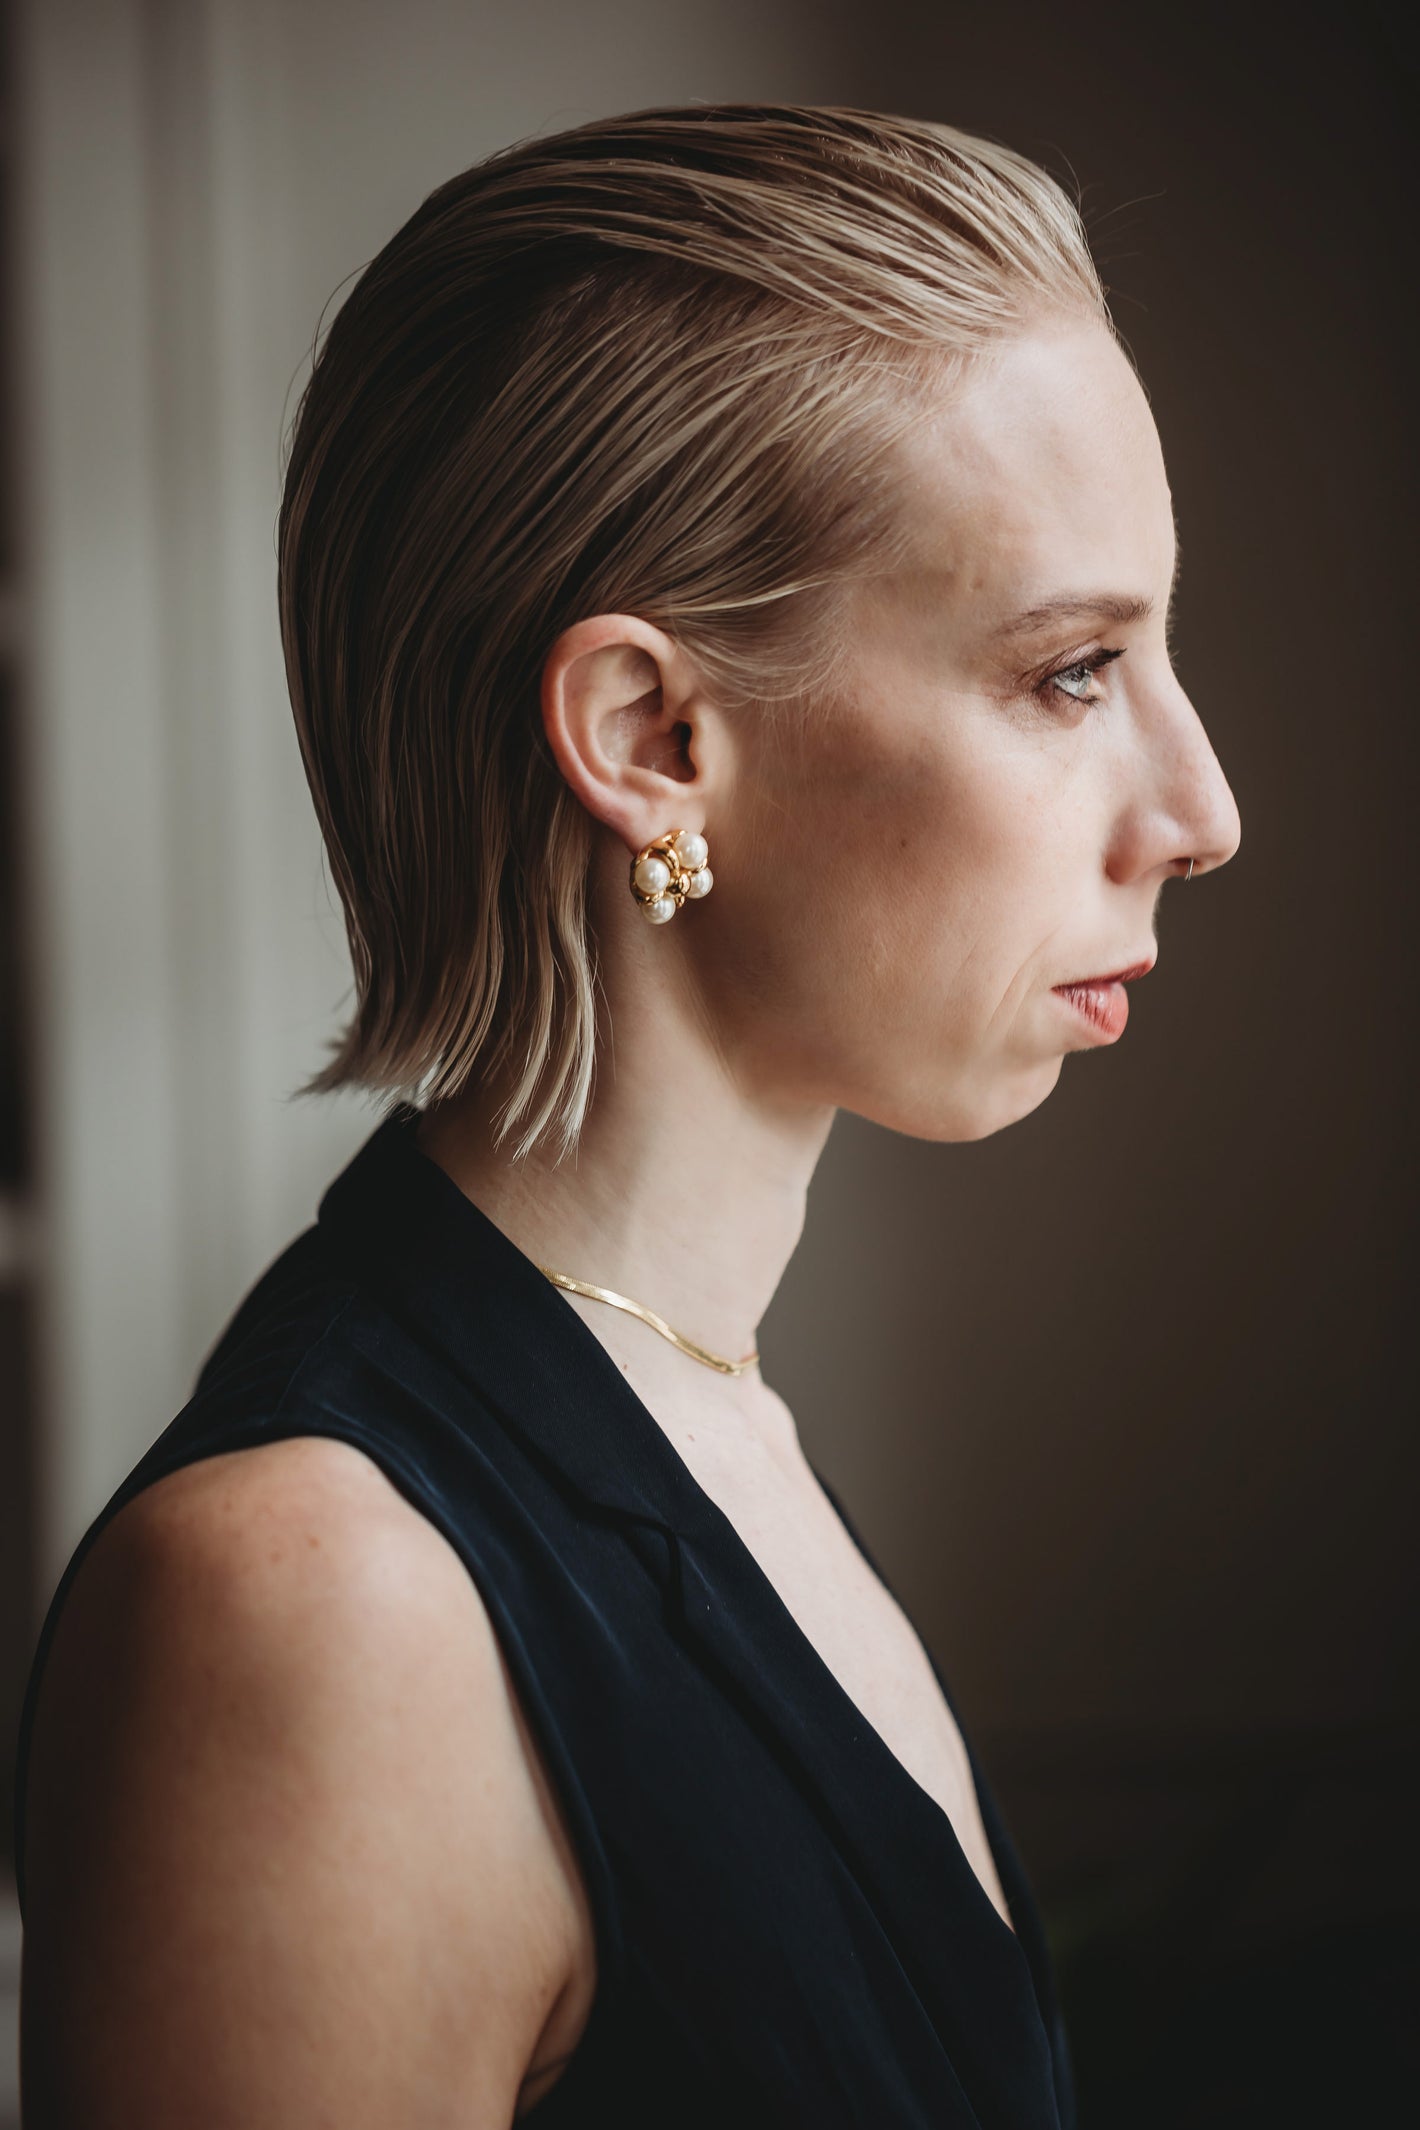 Side profile of a blonde woman wearing pears and a fitted black top | Image by Mary Fehr for basic.